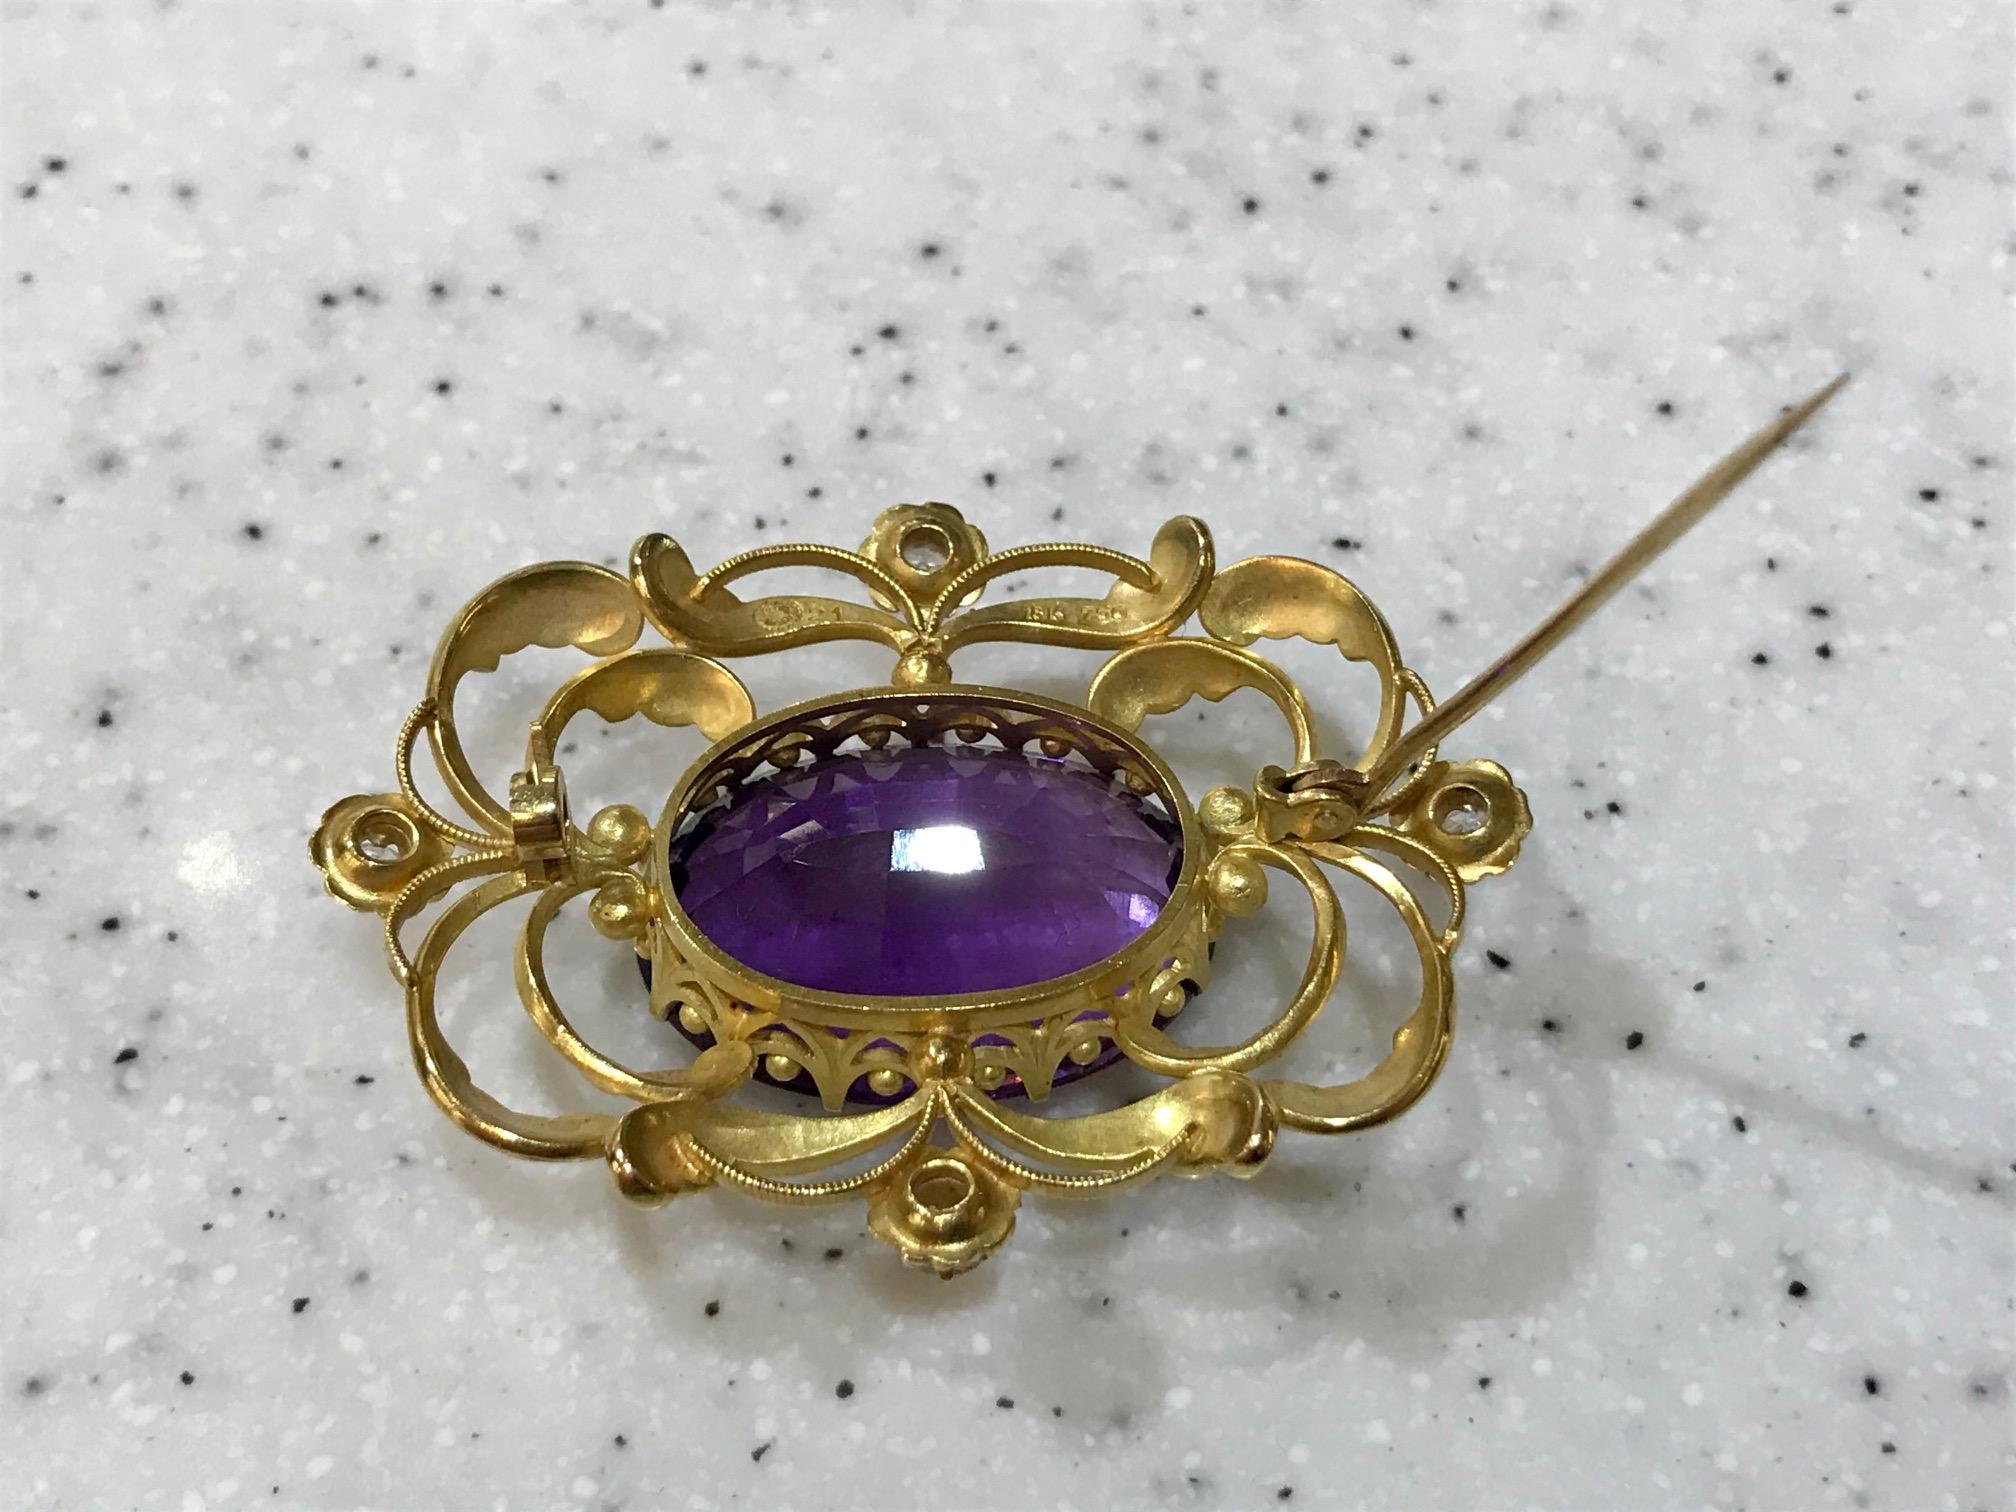 Vintage Georg Jensen Gold Brooch 21 Amethyst and Diamonds In Good Condition For Sale In Hellerup, DK